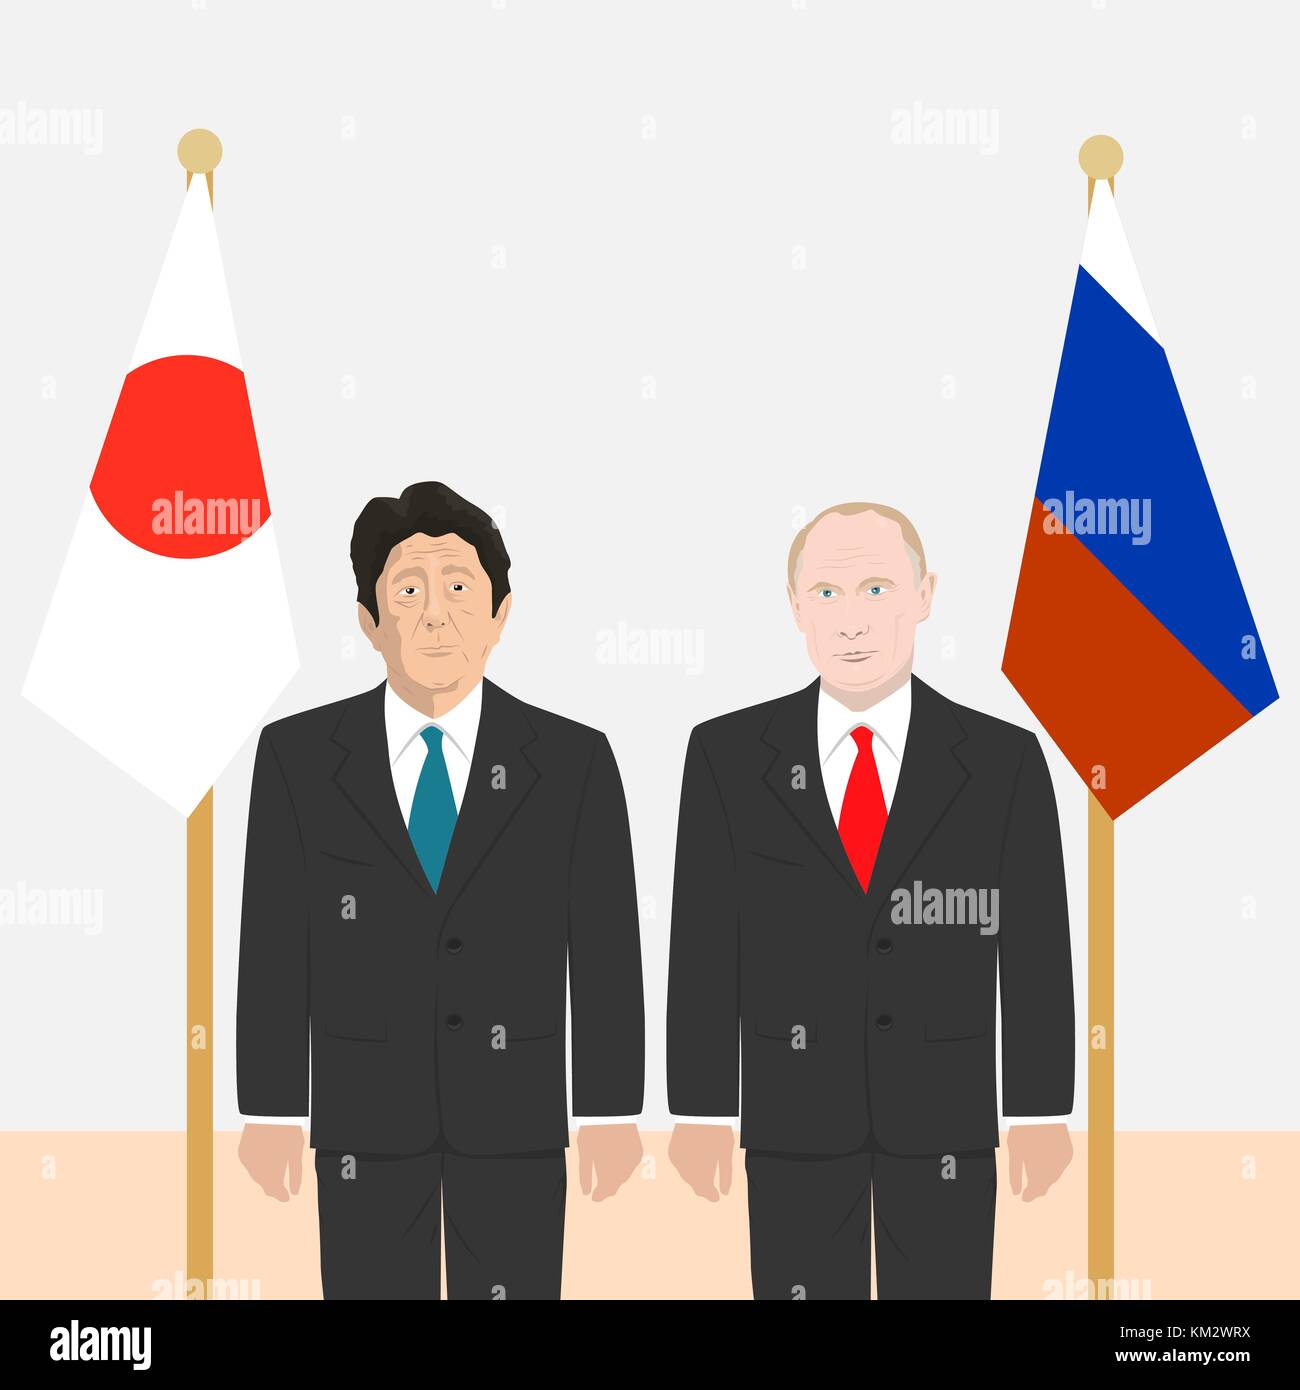 03.12.2017 Editorial illustration of the Prime Minister of Japan Shinzo Abe and the Russian Federation President Vladimir Putin on flags background. Stock Vector